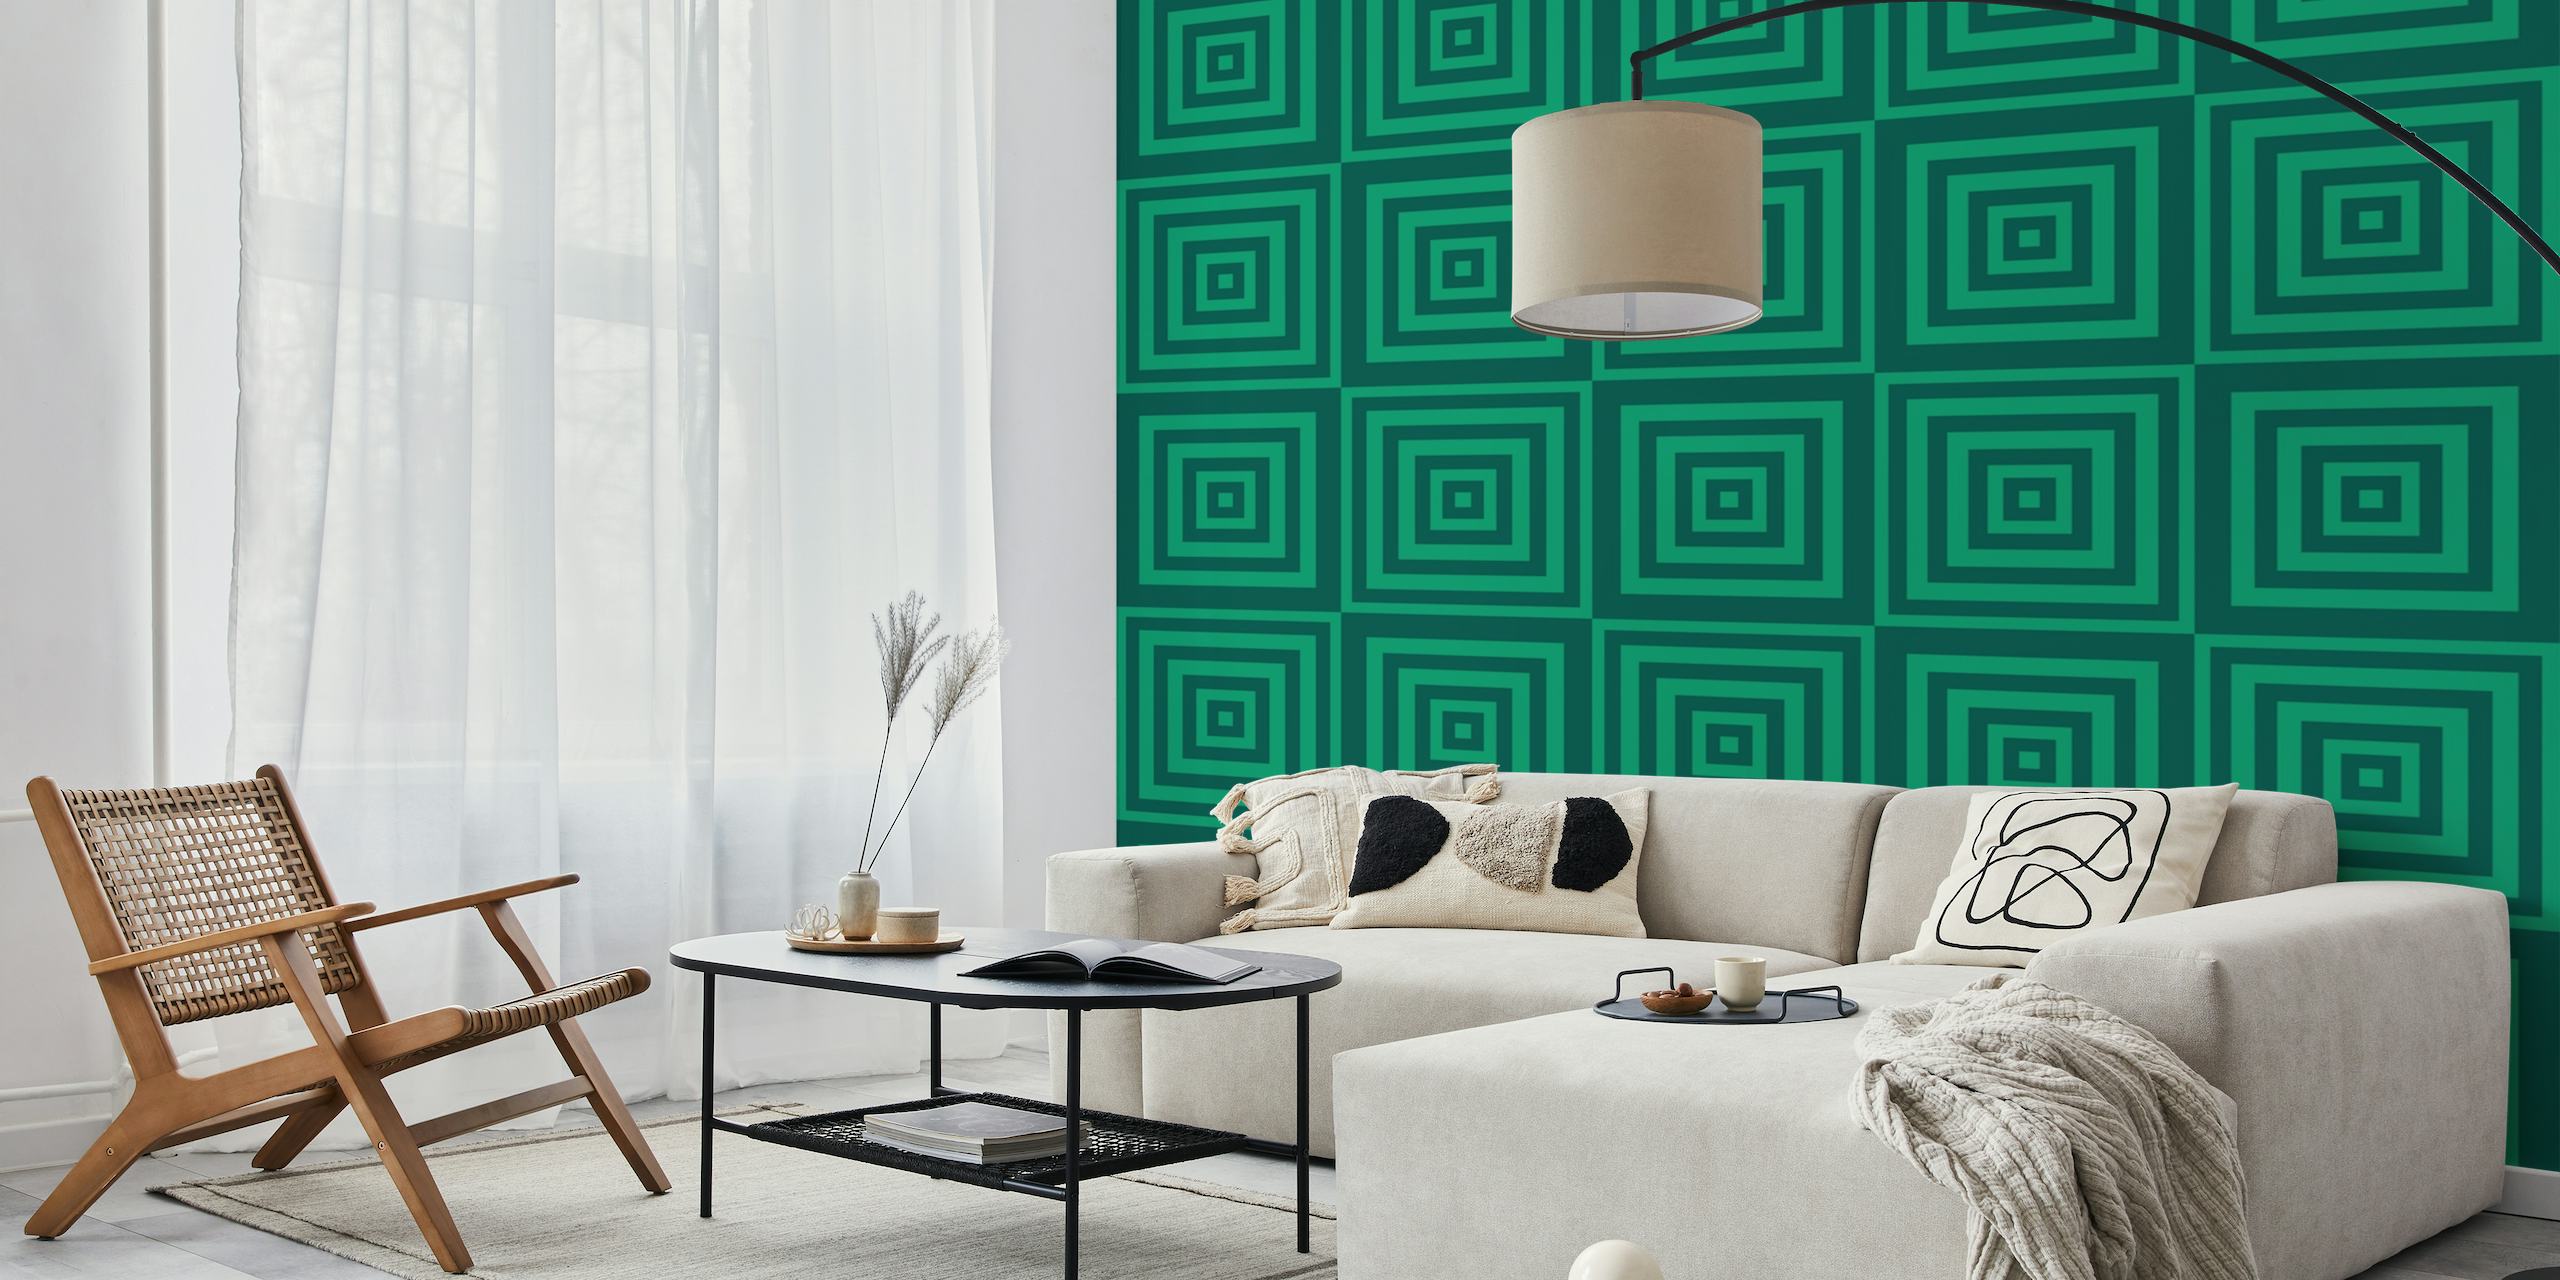 Green abstract geometric square pattern behang